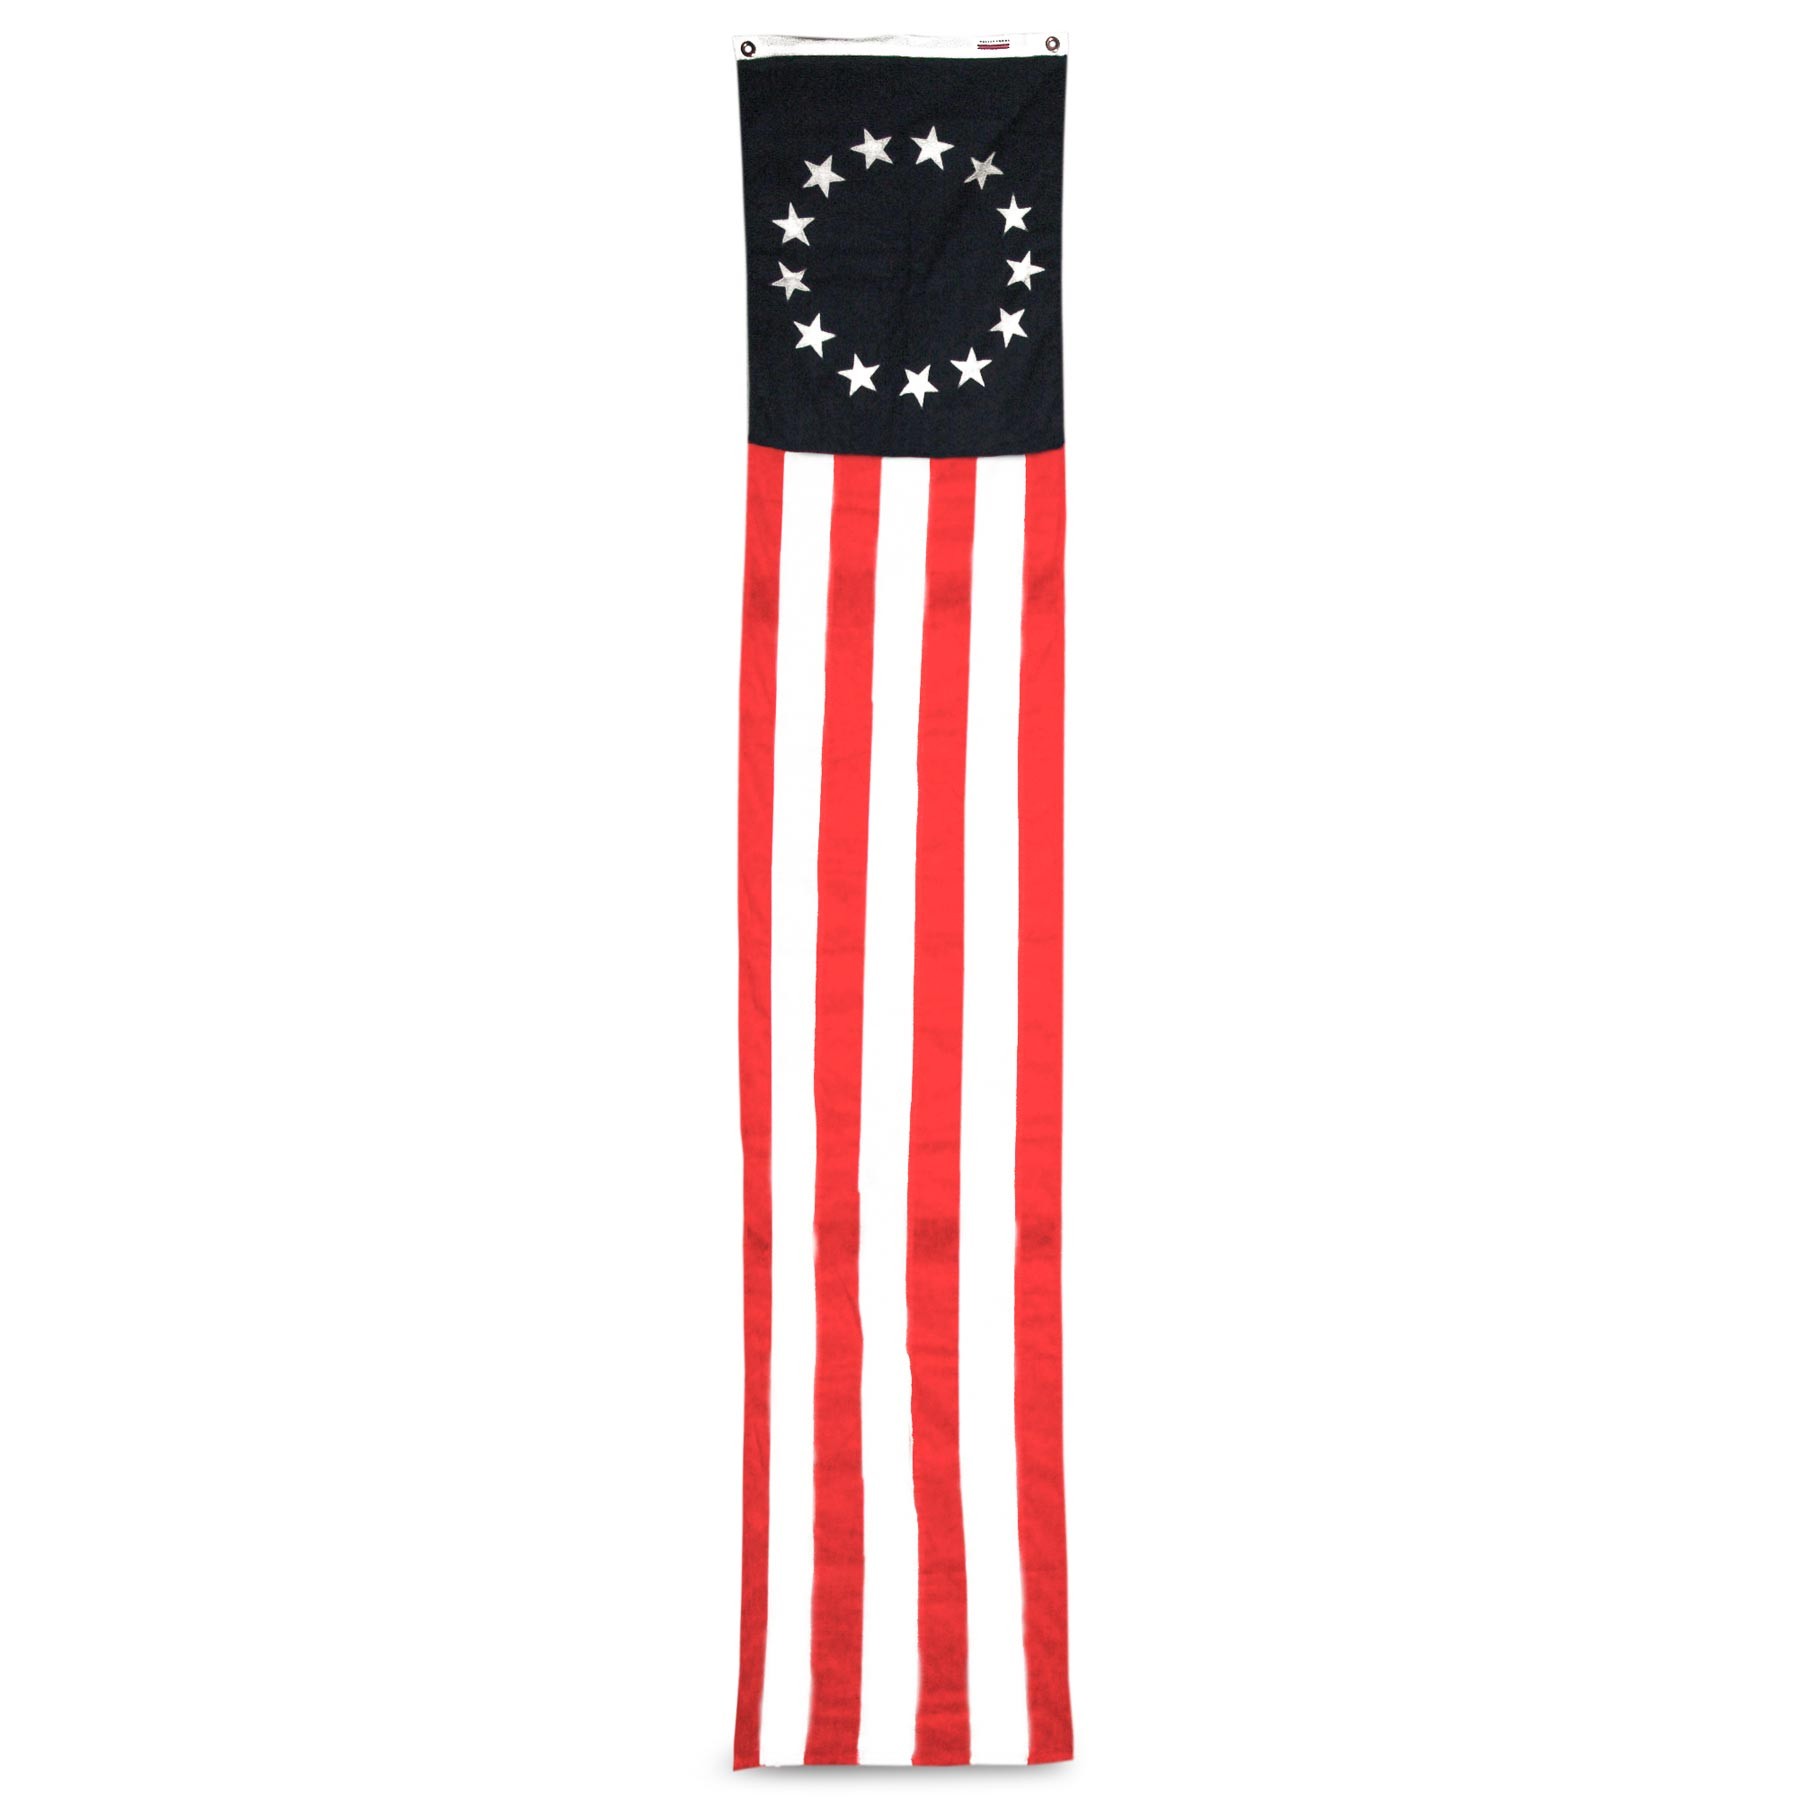 13-Star 20in x 8ft Poly/Cotton Flag Pull Down by Valley Forge